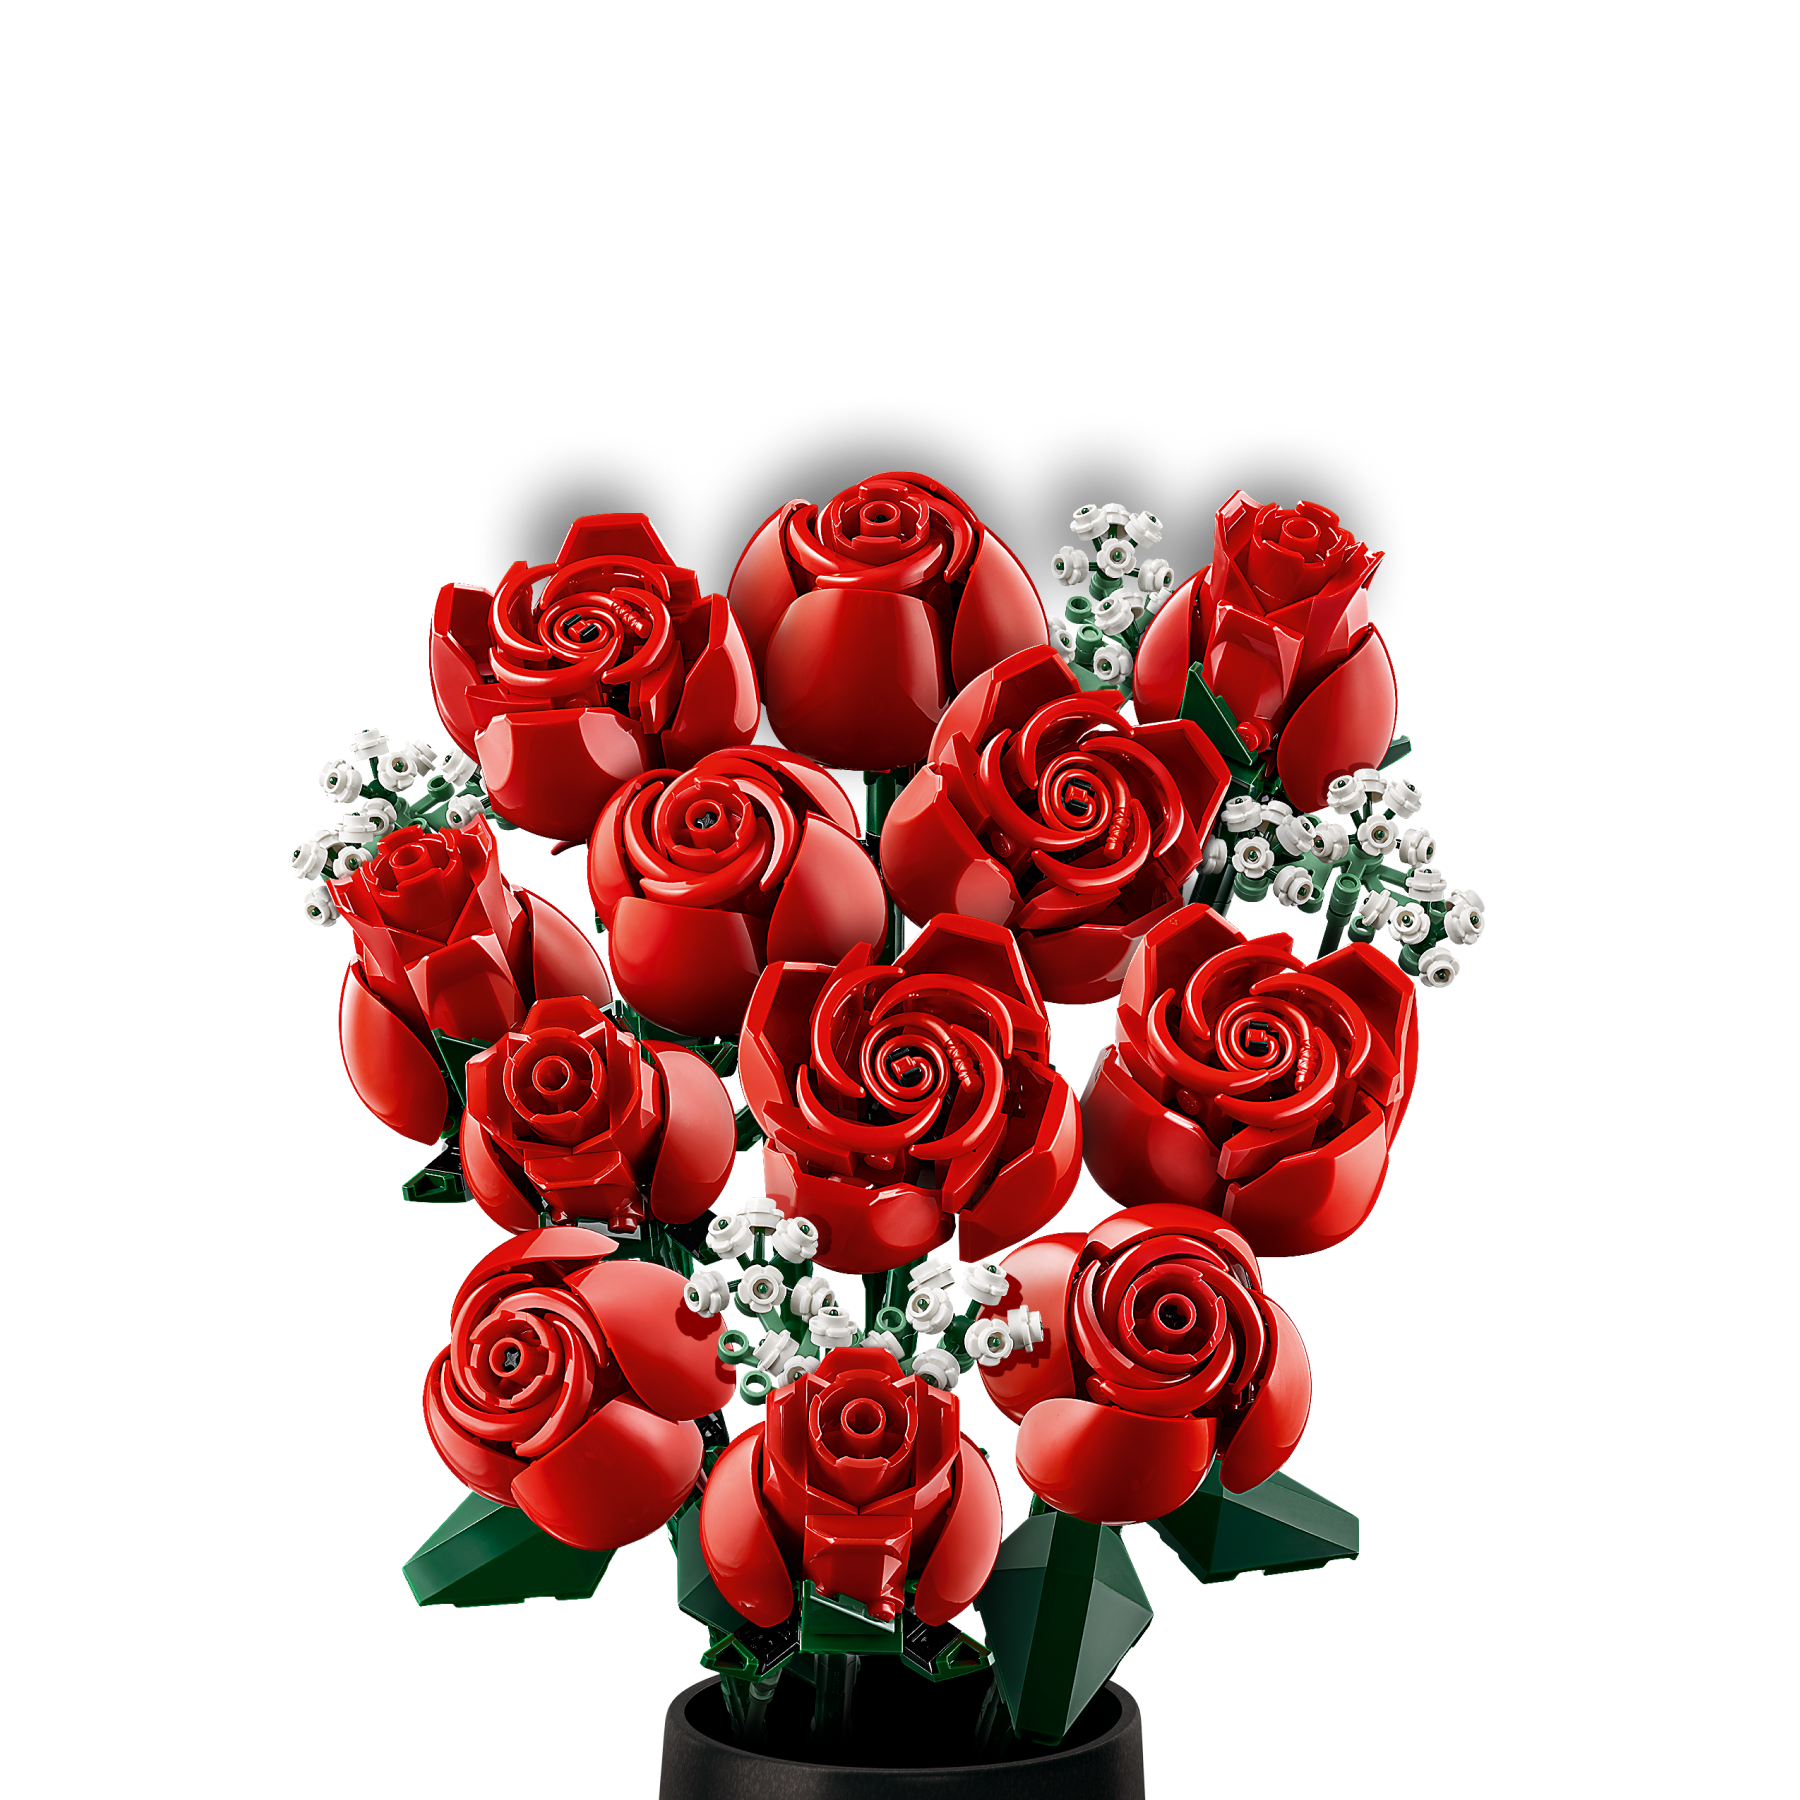 Lego bouquet of roses in glass case on white background on Craiyon